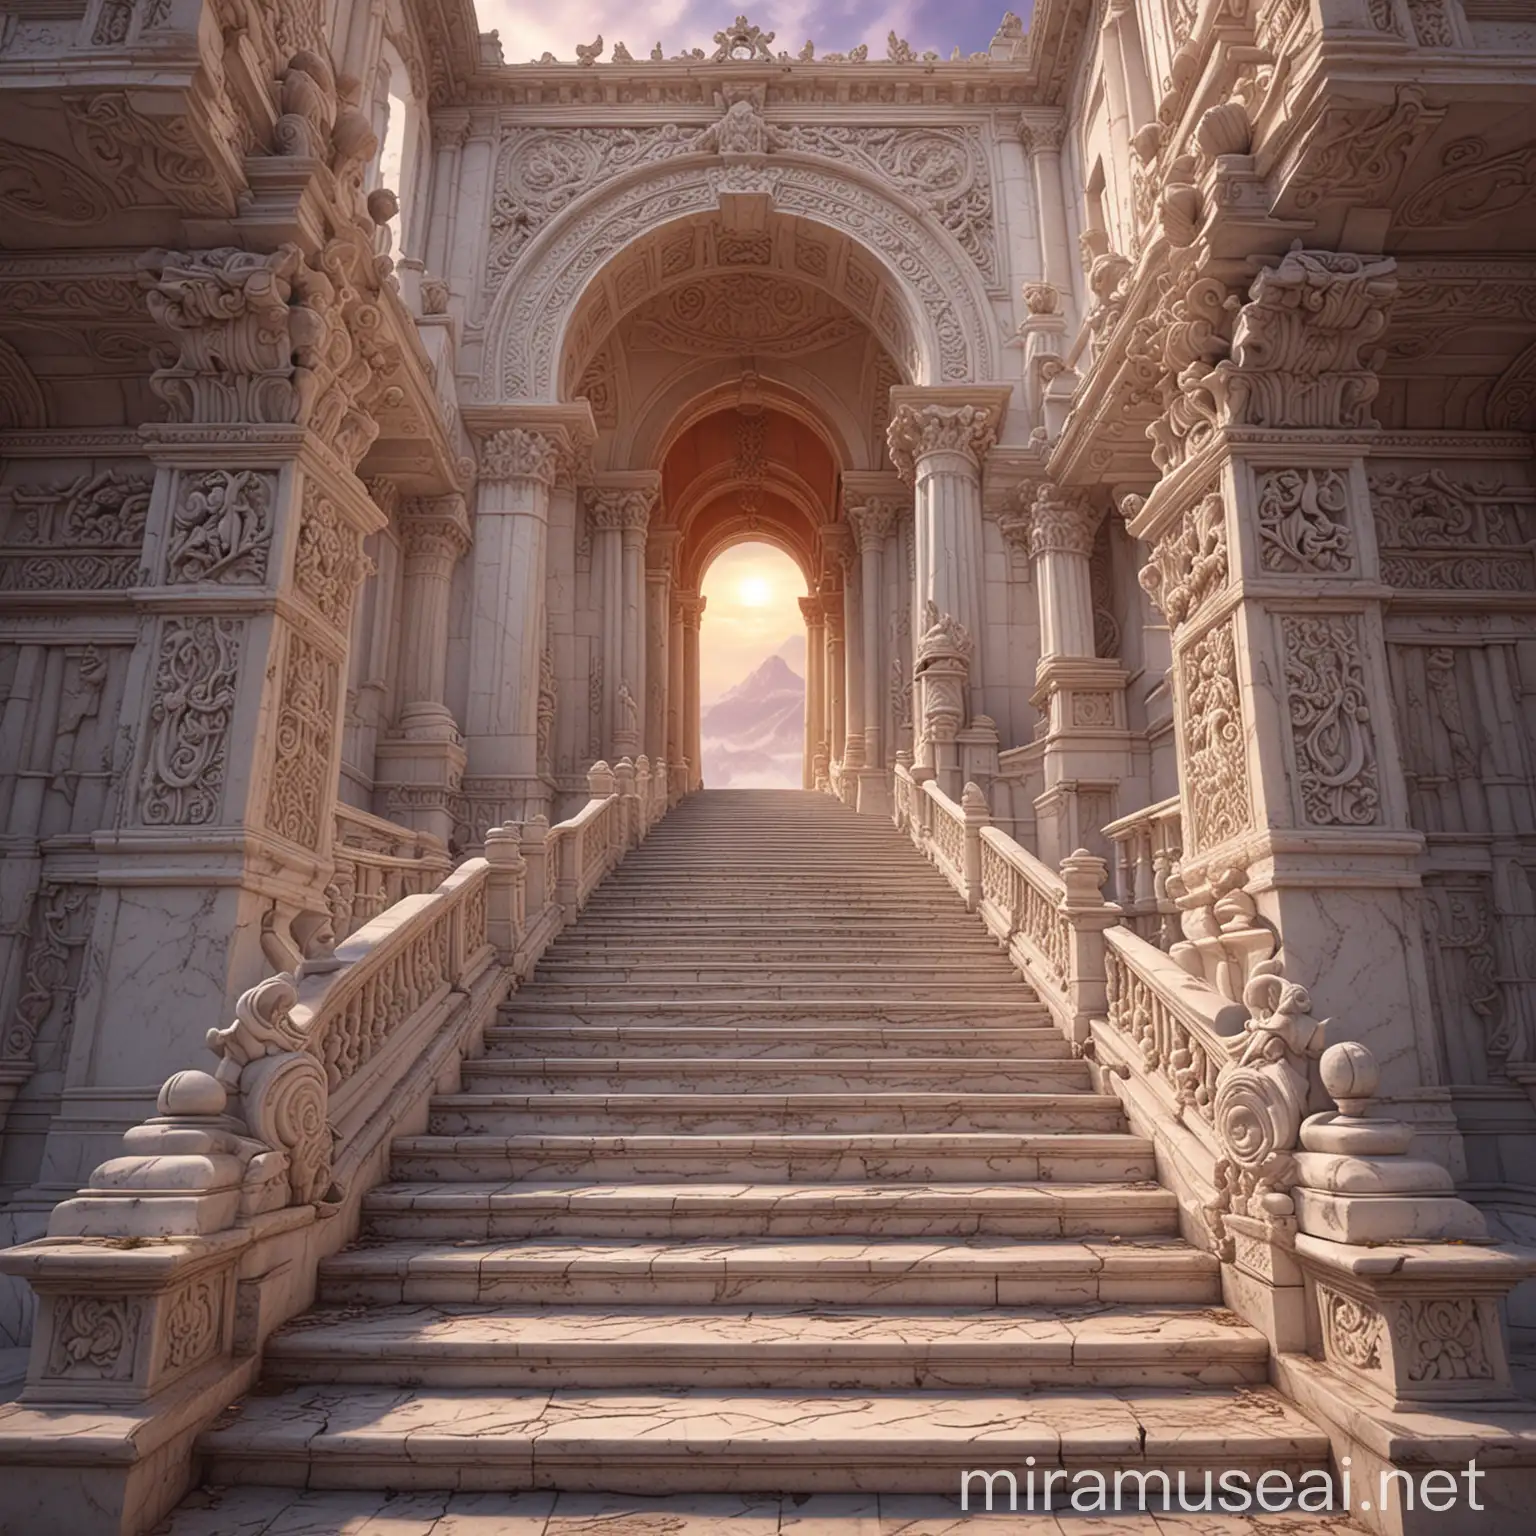 Majestic White Marble Stairway Ascending to Kingdom in Sunset Hues